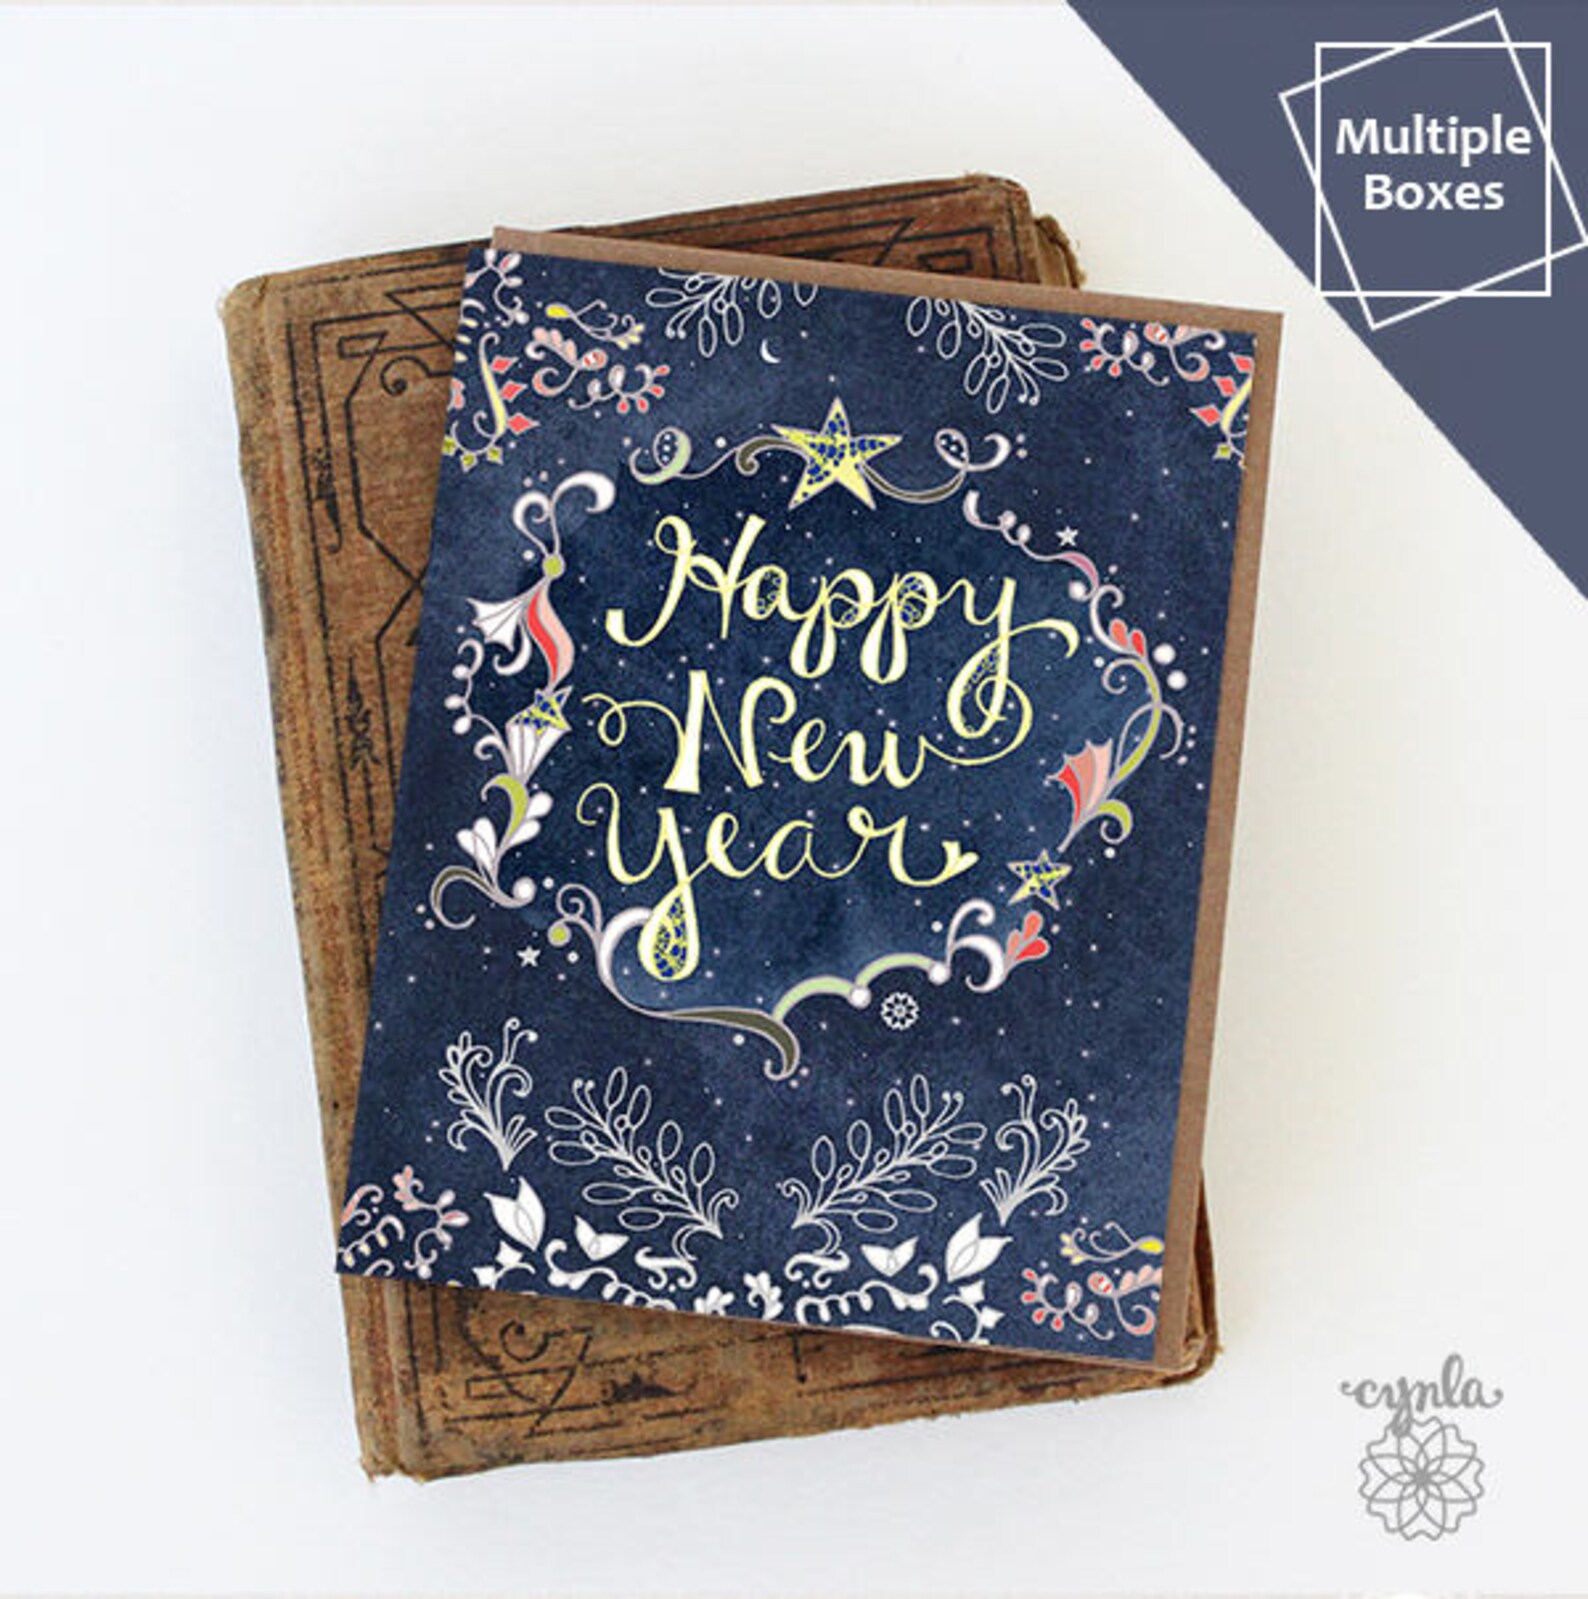 Starry Happy New Year Boxed Sets of Greeting Cards Happy New Etsy